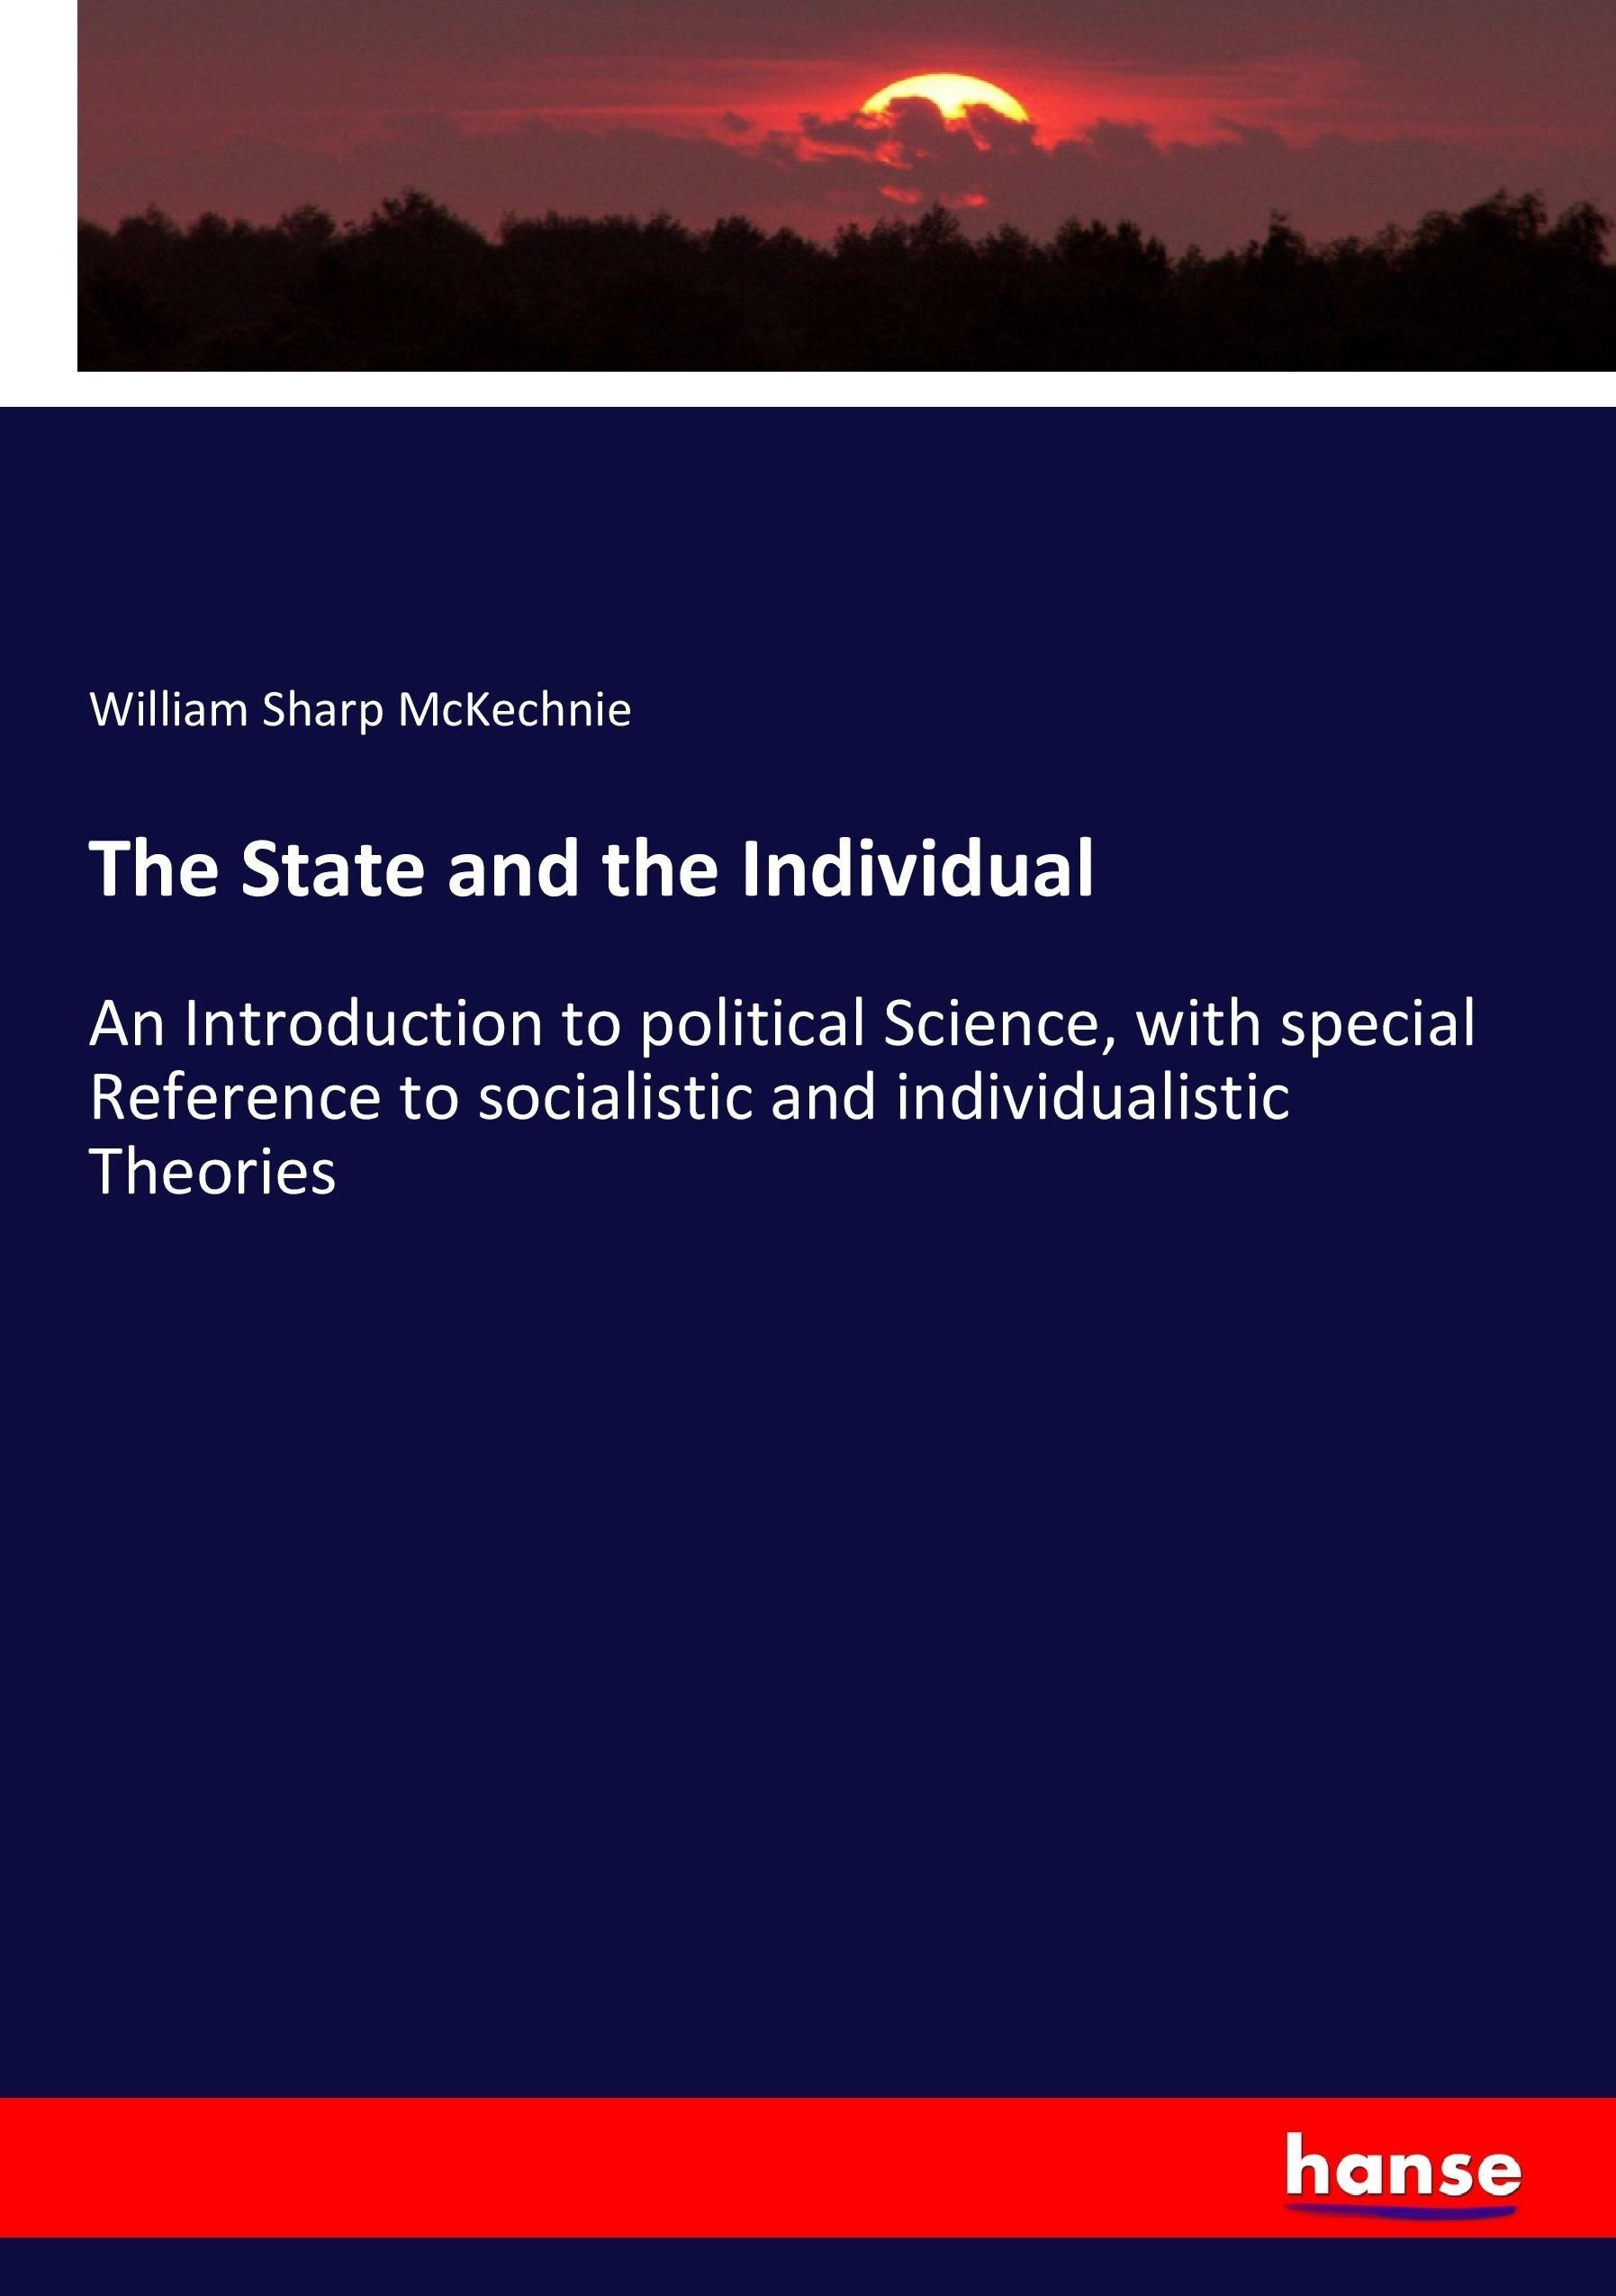 The State and the Individual - Mckechnie, William Sharp